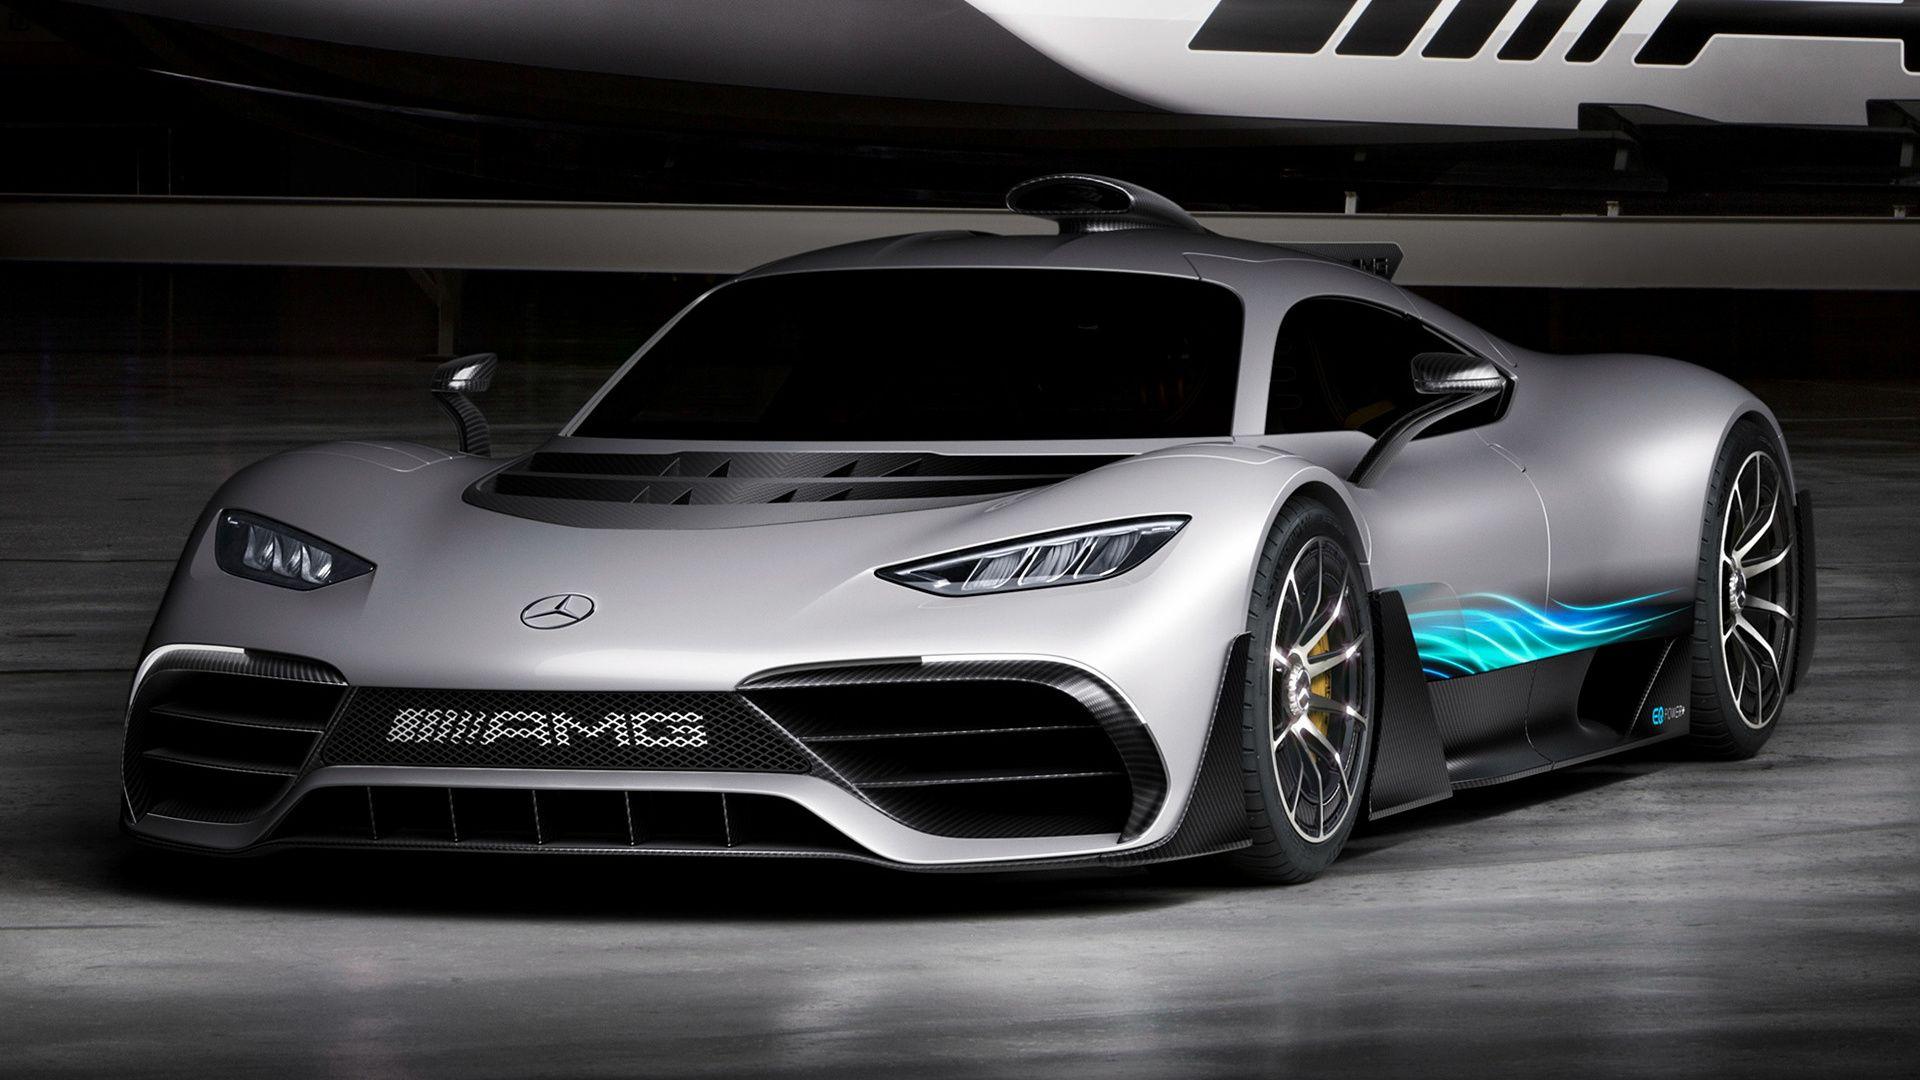 Mercedes AMG Project One (2017) Wallpaper And HD Image